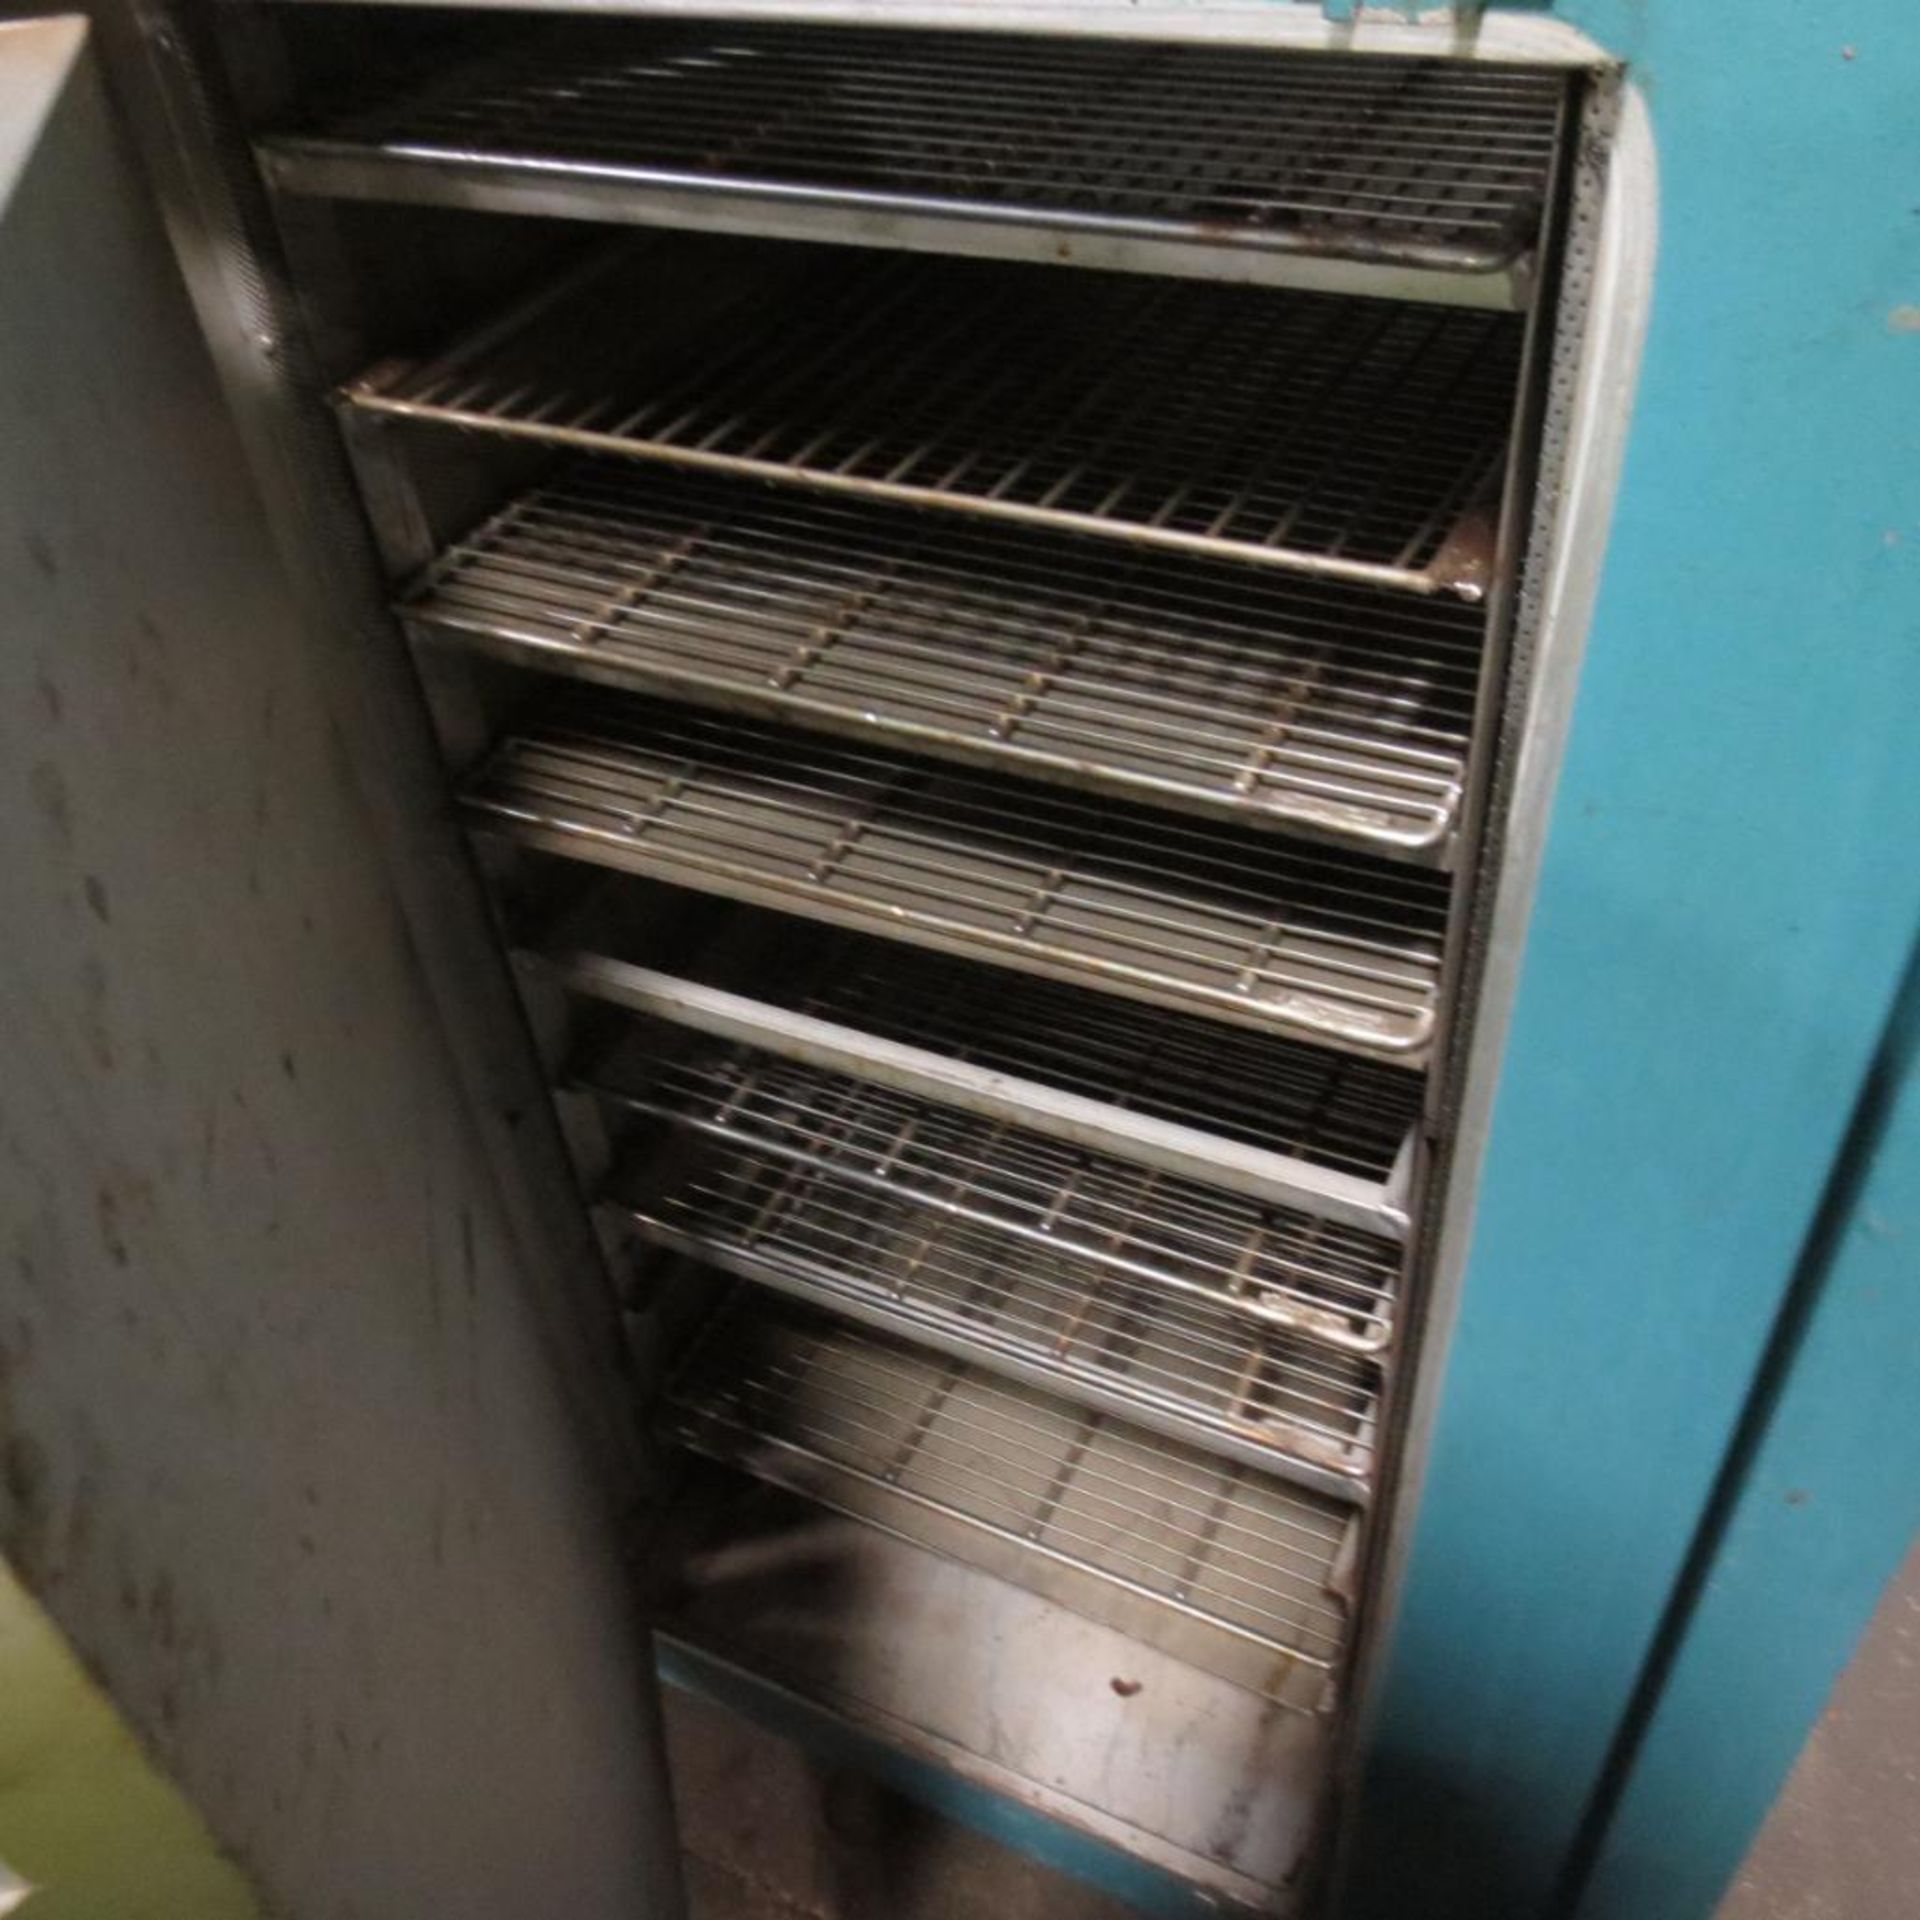 Despatch Type BBC-210 Oven, Temp 500 F, 12 KW, 3/1 PH, 240 / 120 V, S/N 102168. Loading Fee is $50.0 - Image 3 of 4